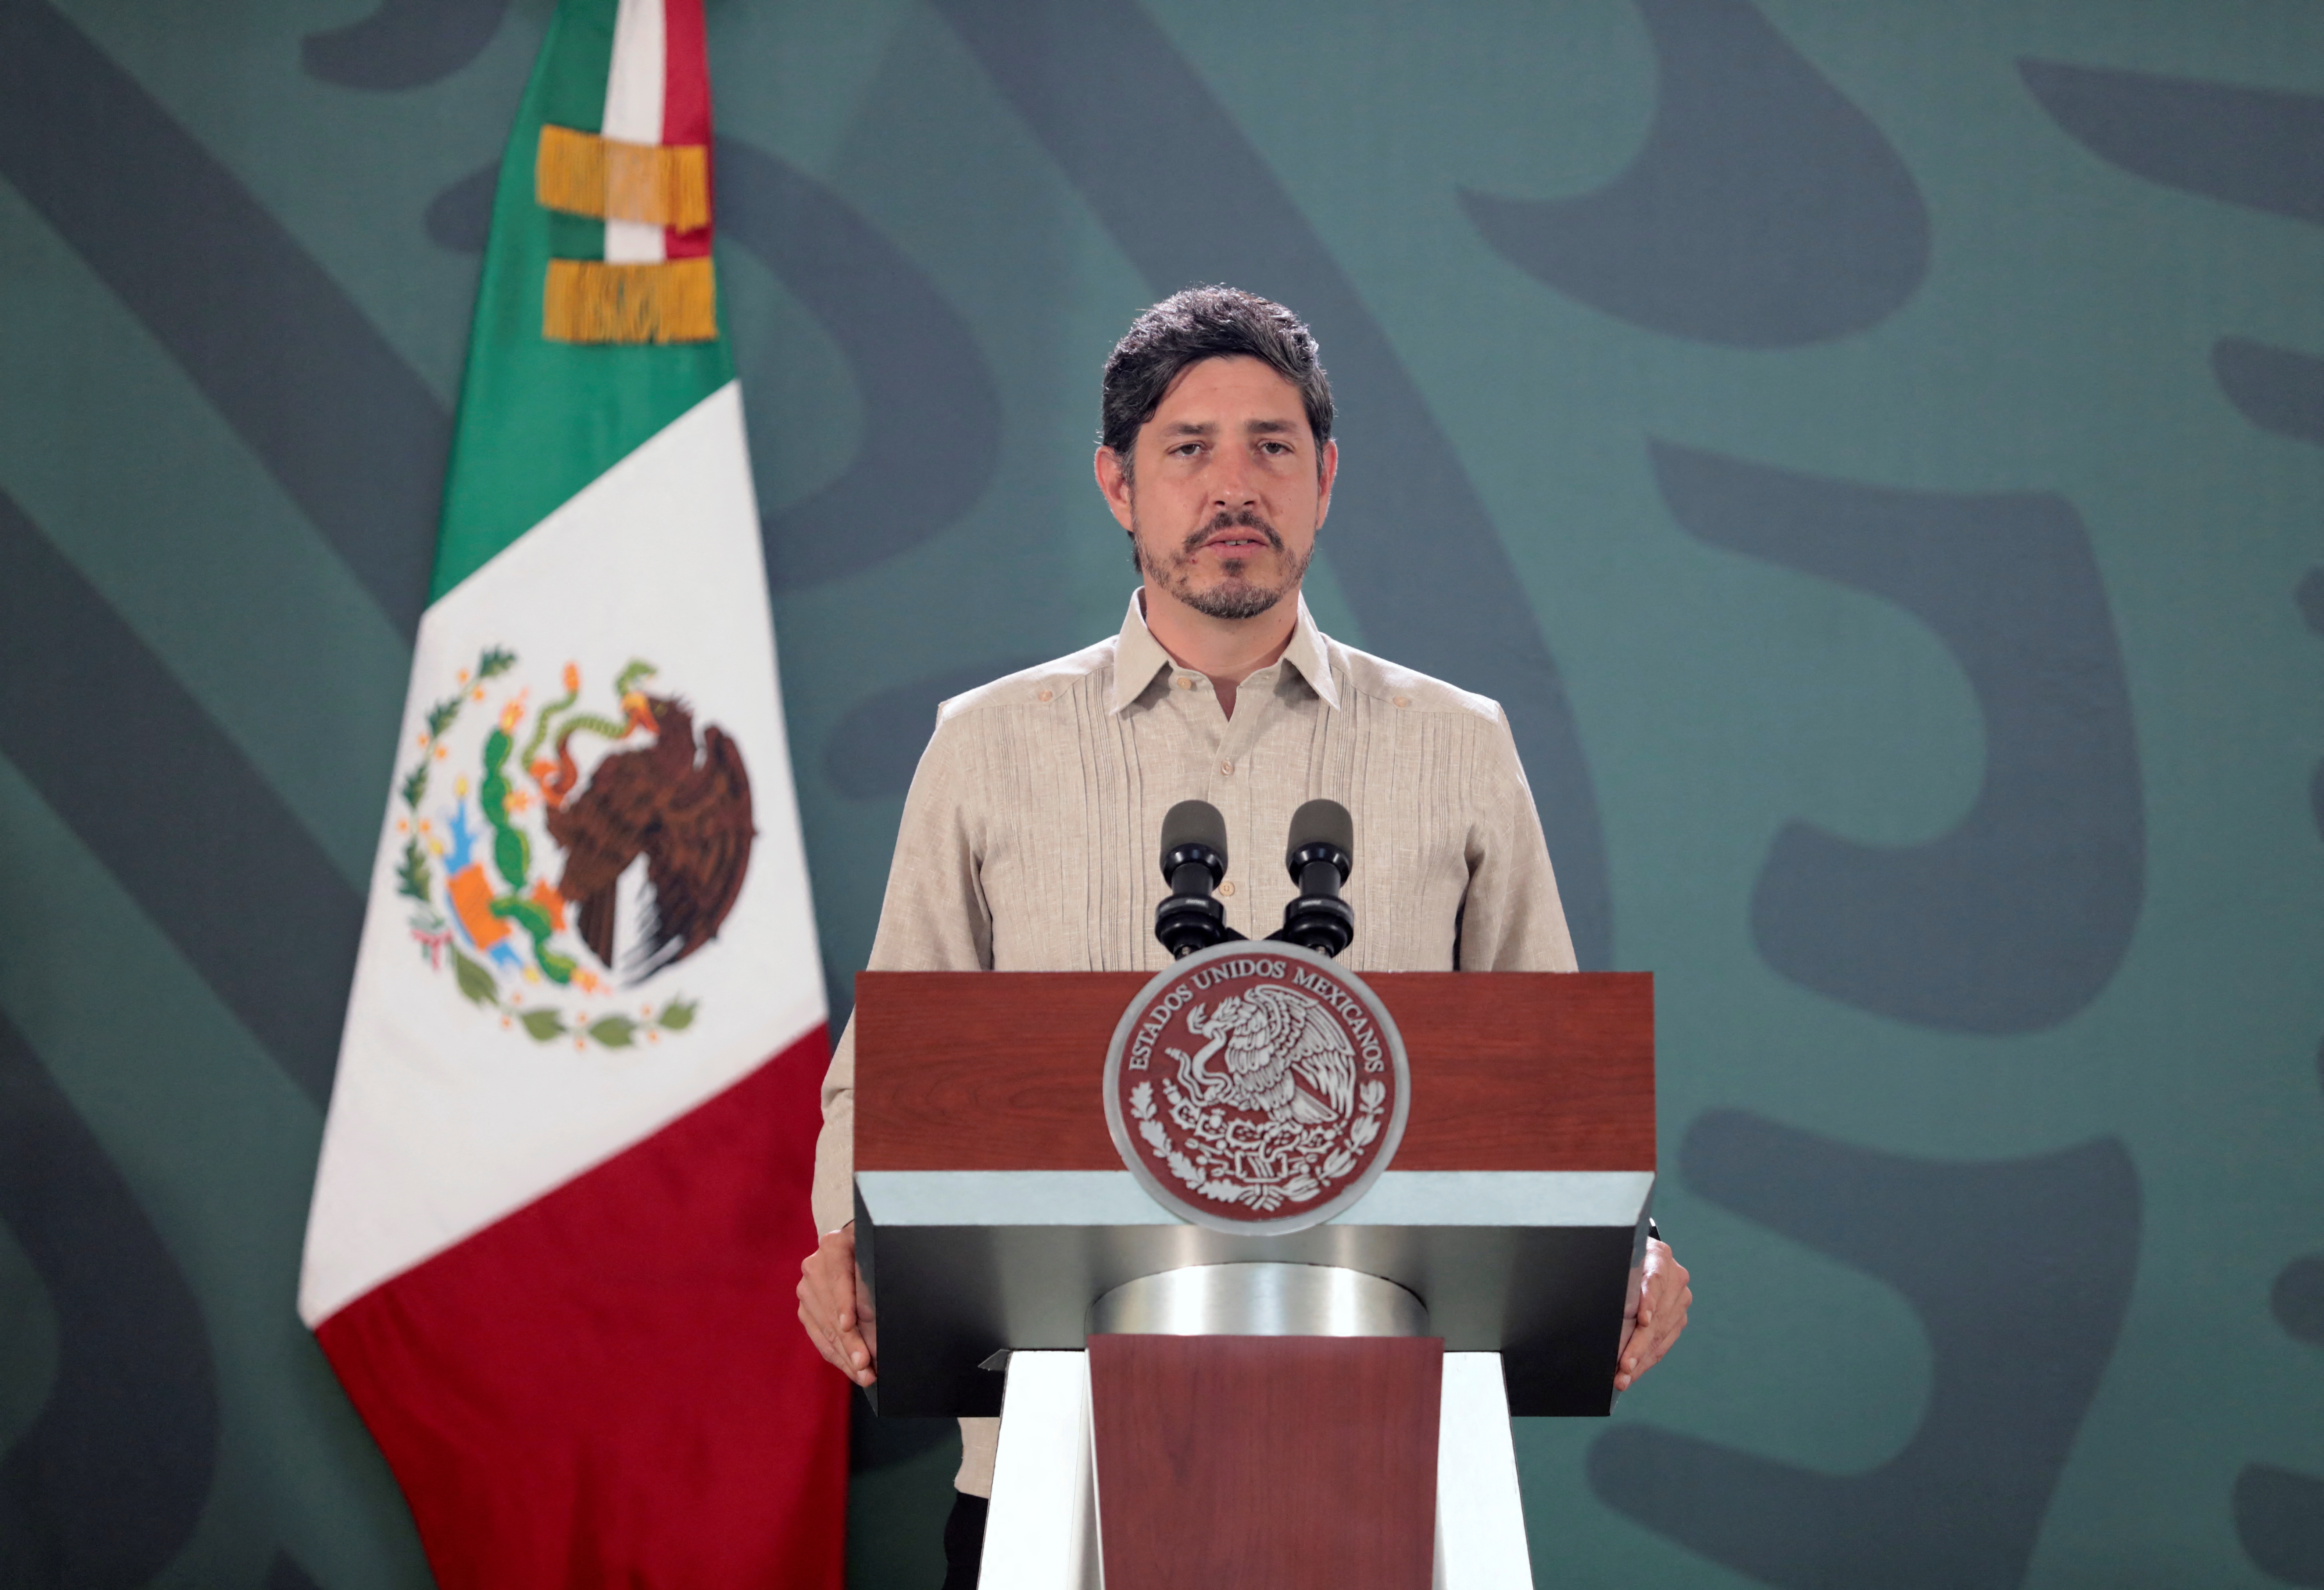 Mexico's Ambassador Pablo Monroy speaks after Peru declared him persona non grata and ordered Monroy to leave the country, during a news conference in Villahermosa, in Tabasco state, Mexico, December 23, 2022. Mexico's Presidency/Handout via REUTERS ATTENTION EDITORS - THIS IMAGE WAS PROVIDED BY A THIRD PARTY. NO RESALES. NO ARCHIVES MANDATORY CREDIT